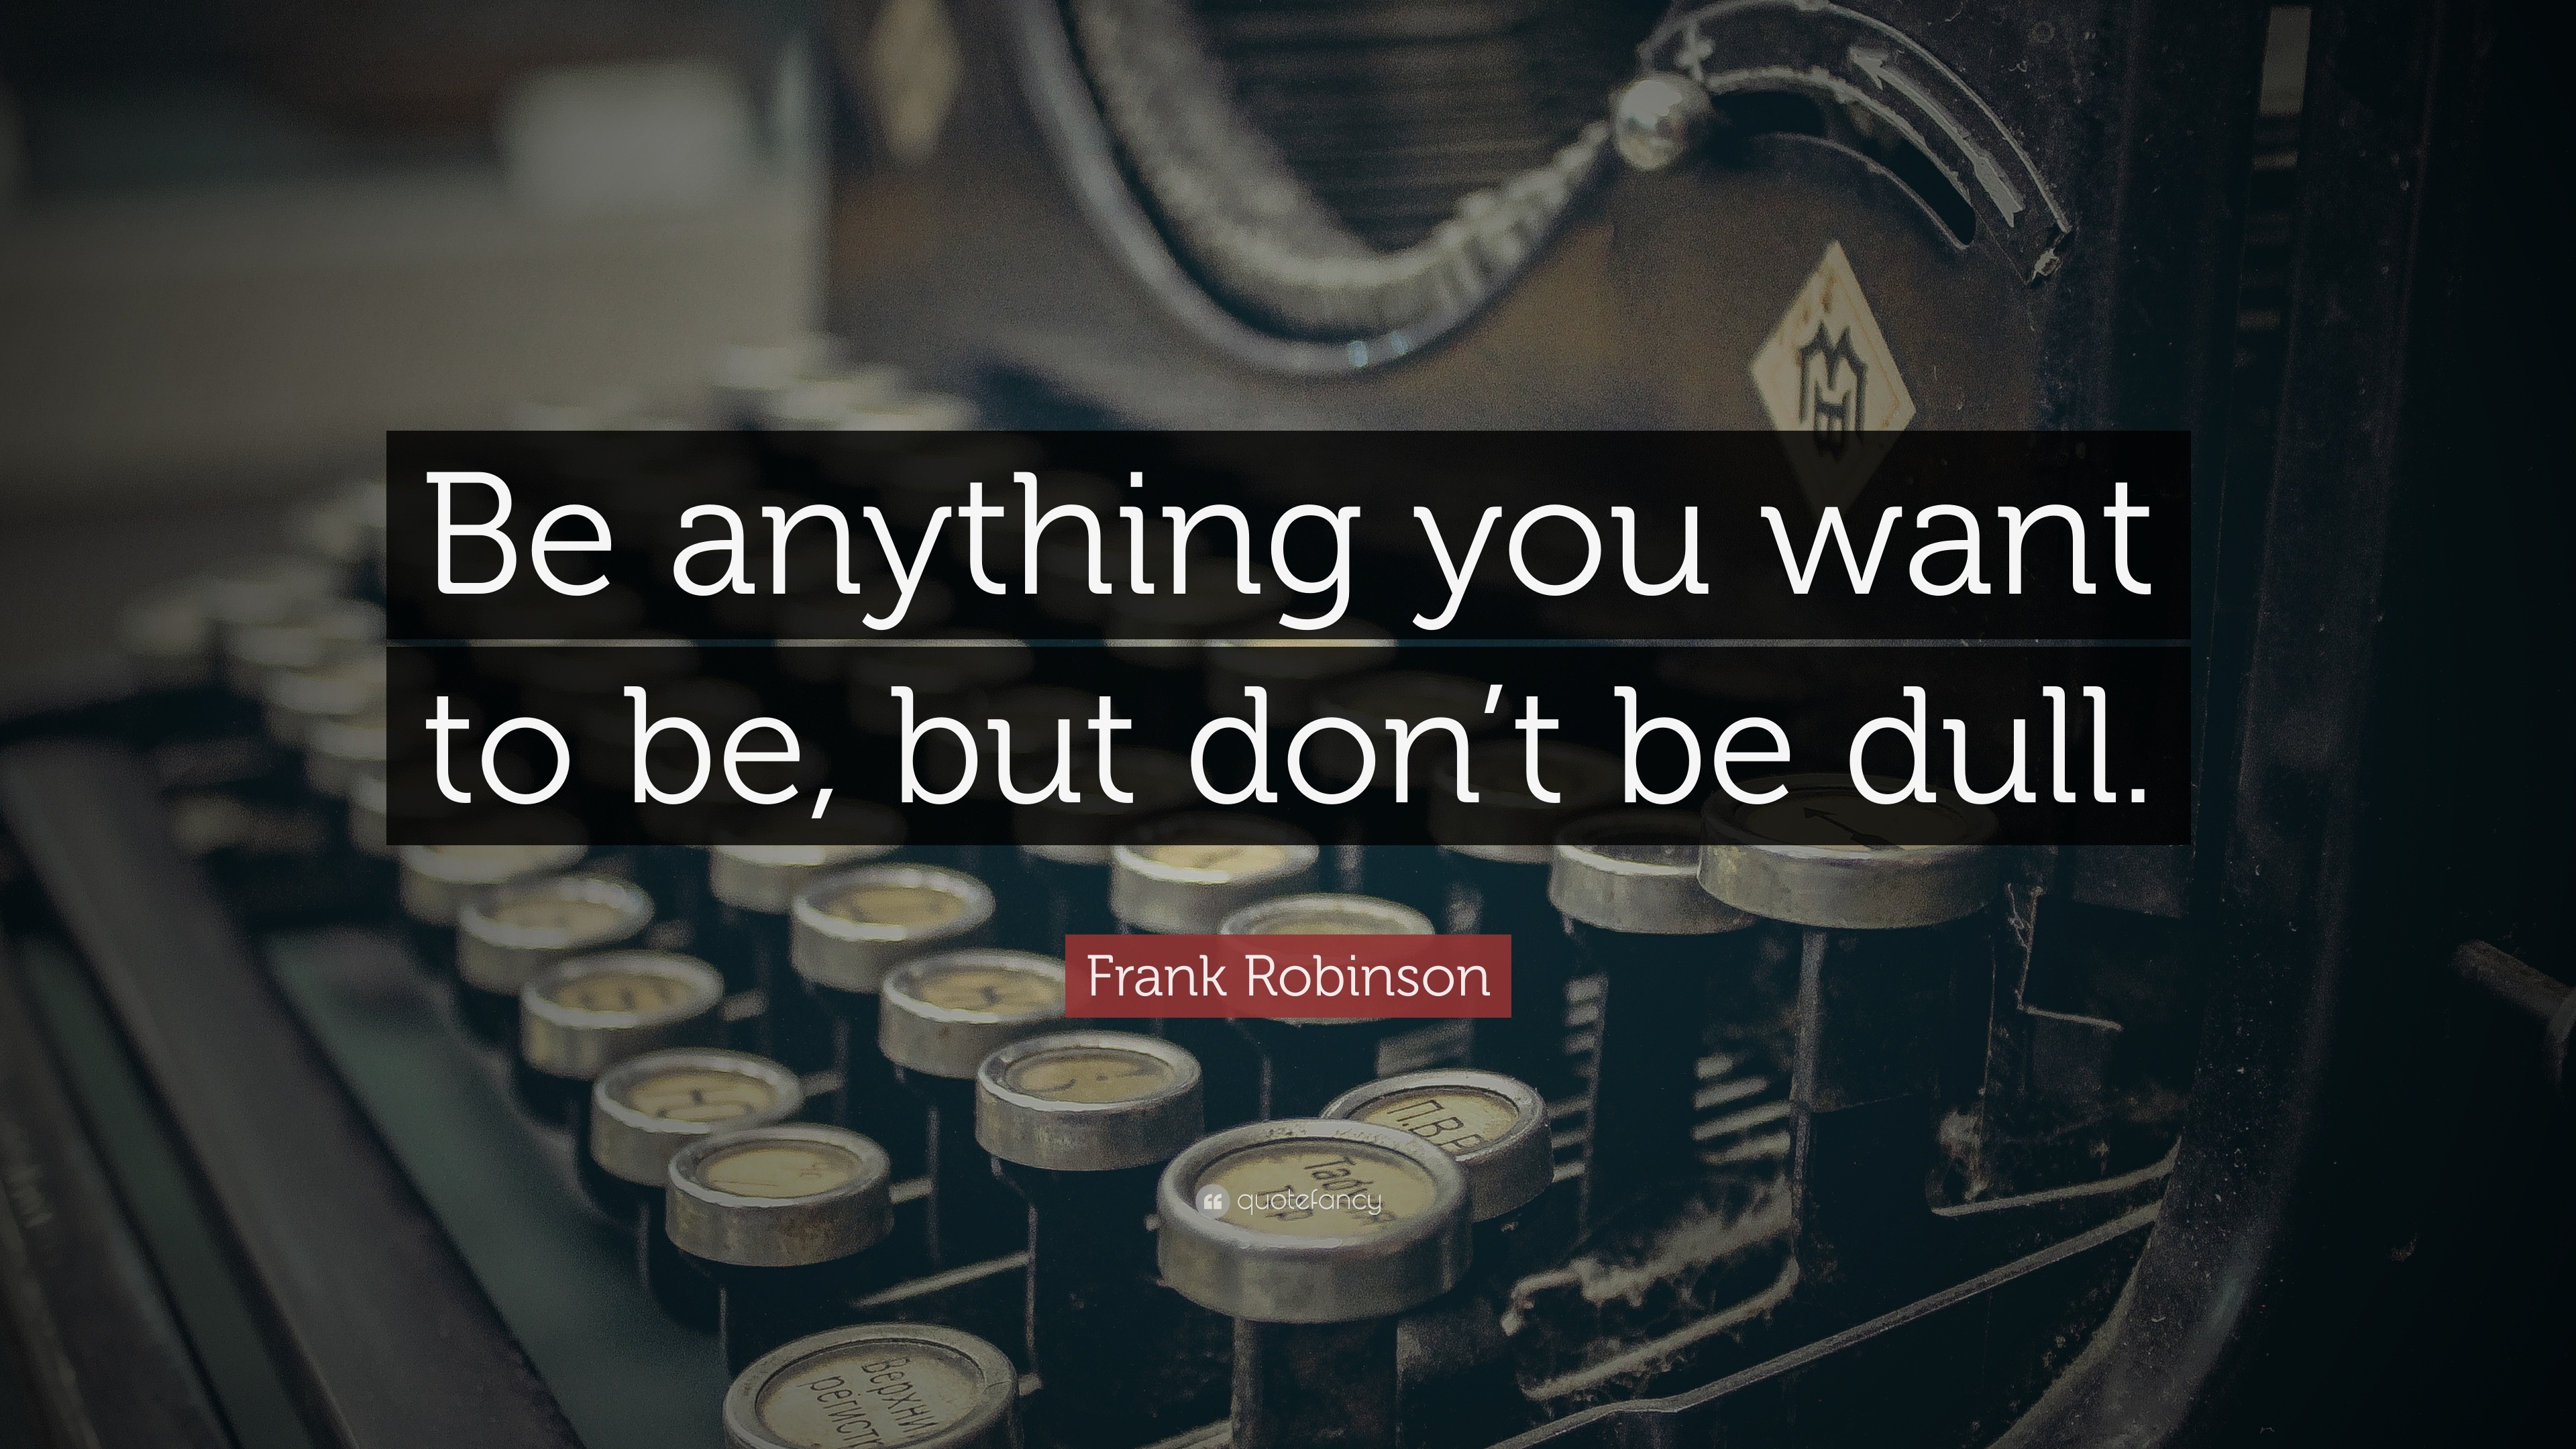 Top 15 Frank Robinson Quotes (2023 Update) - Quotefancy